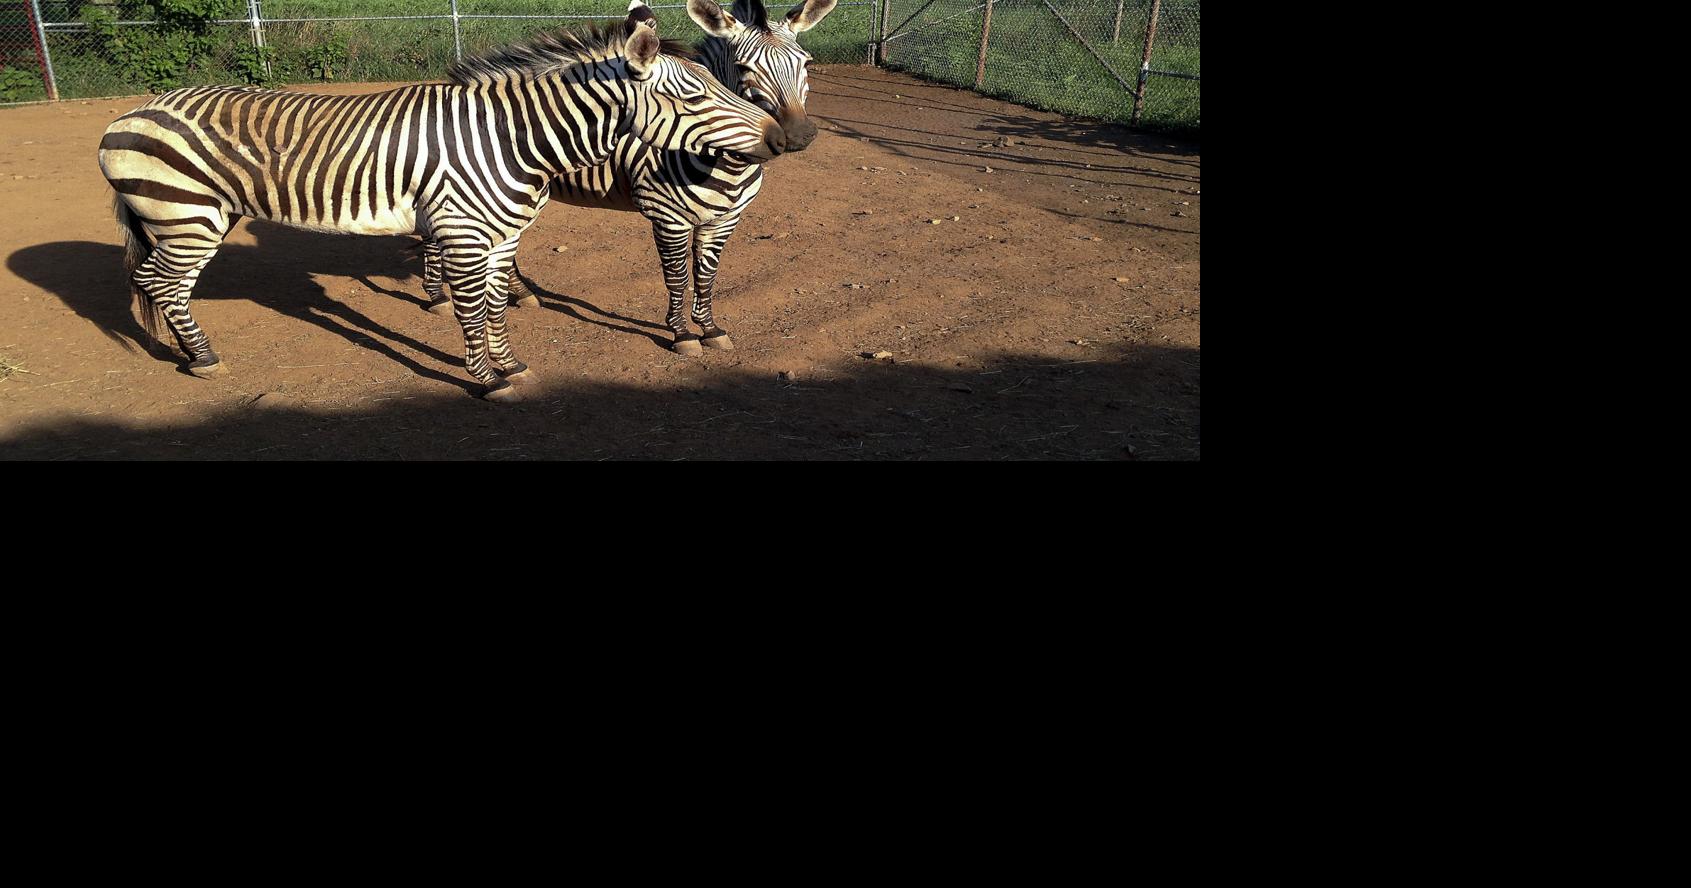 Like Father, Like Son: A Hartmann's Mountain Zebra Update  Smithsonian's  National Zoo and Conservation Biology Institute